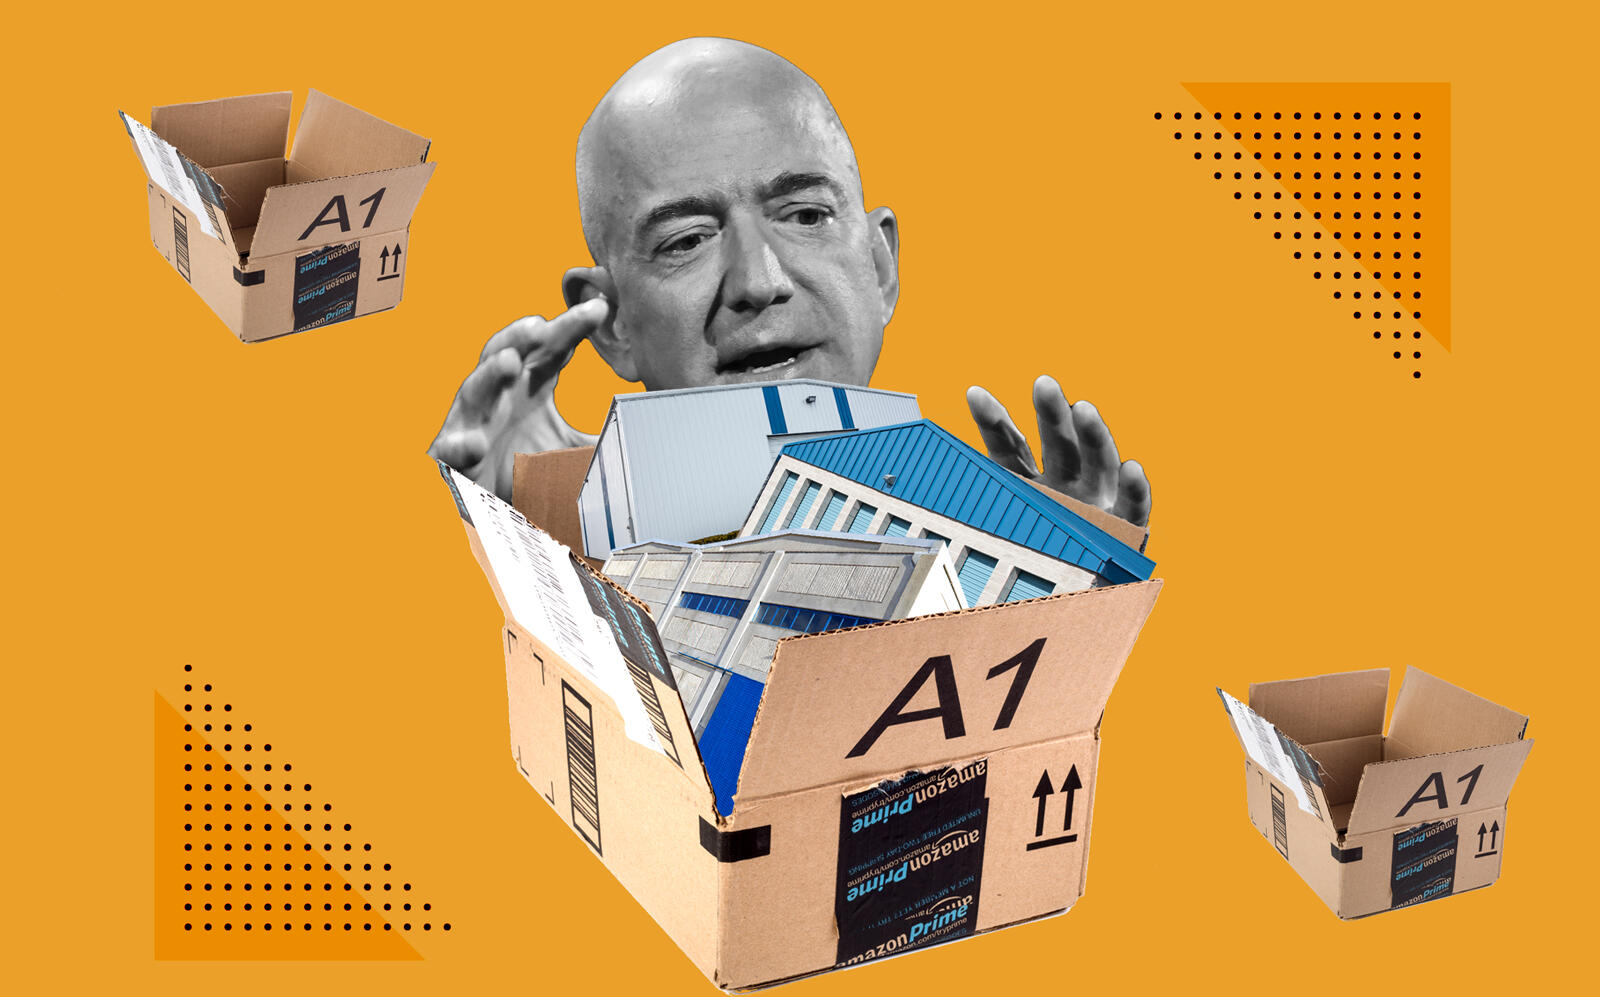 Illustration of Amazon's Jeff Bezos (Photo illustration by Kevin Rebong for The Real Deal)